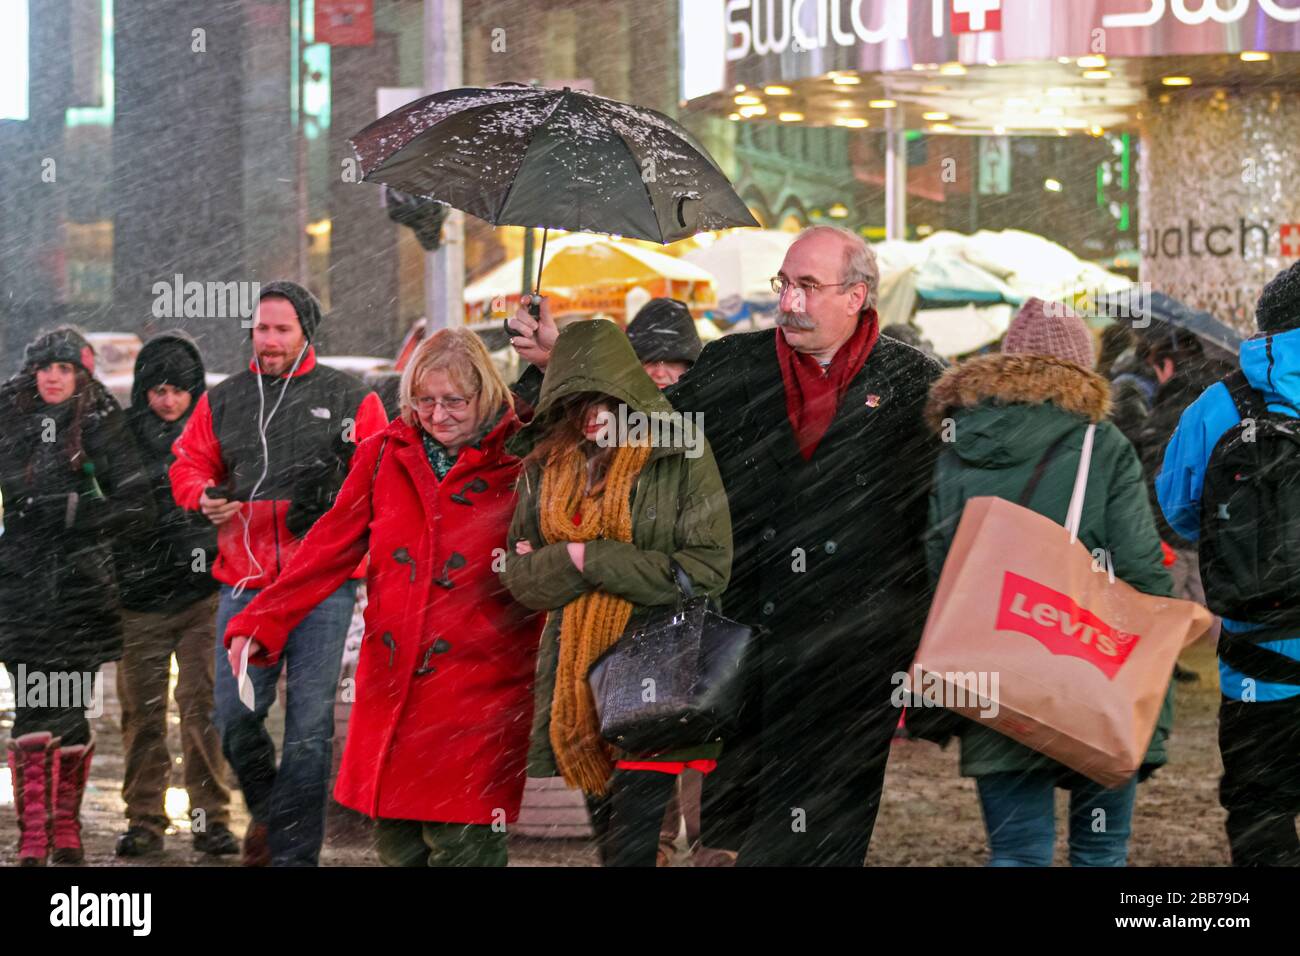 Elderly gentleman covering his wife and daughter with umbrella during a snow blizzard in Time Square, Manhattan, New York City, United States Stock Photo